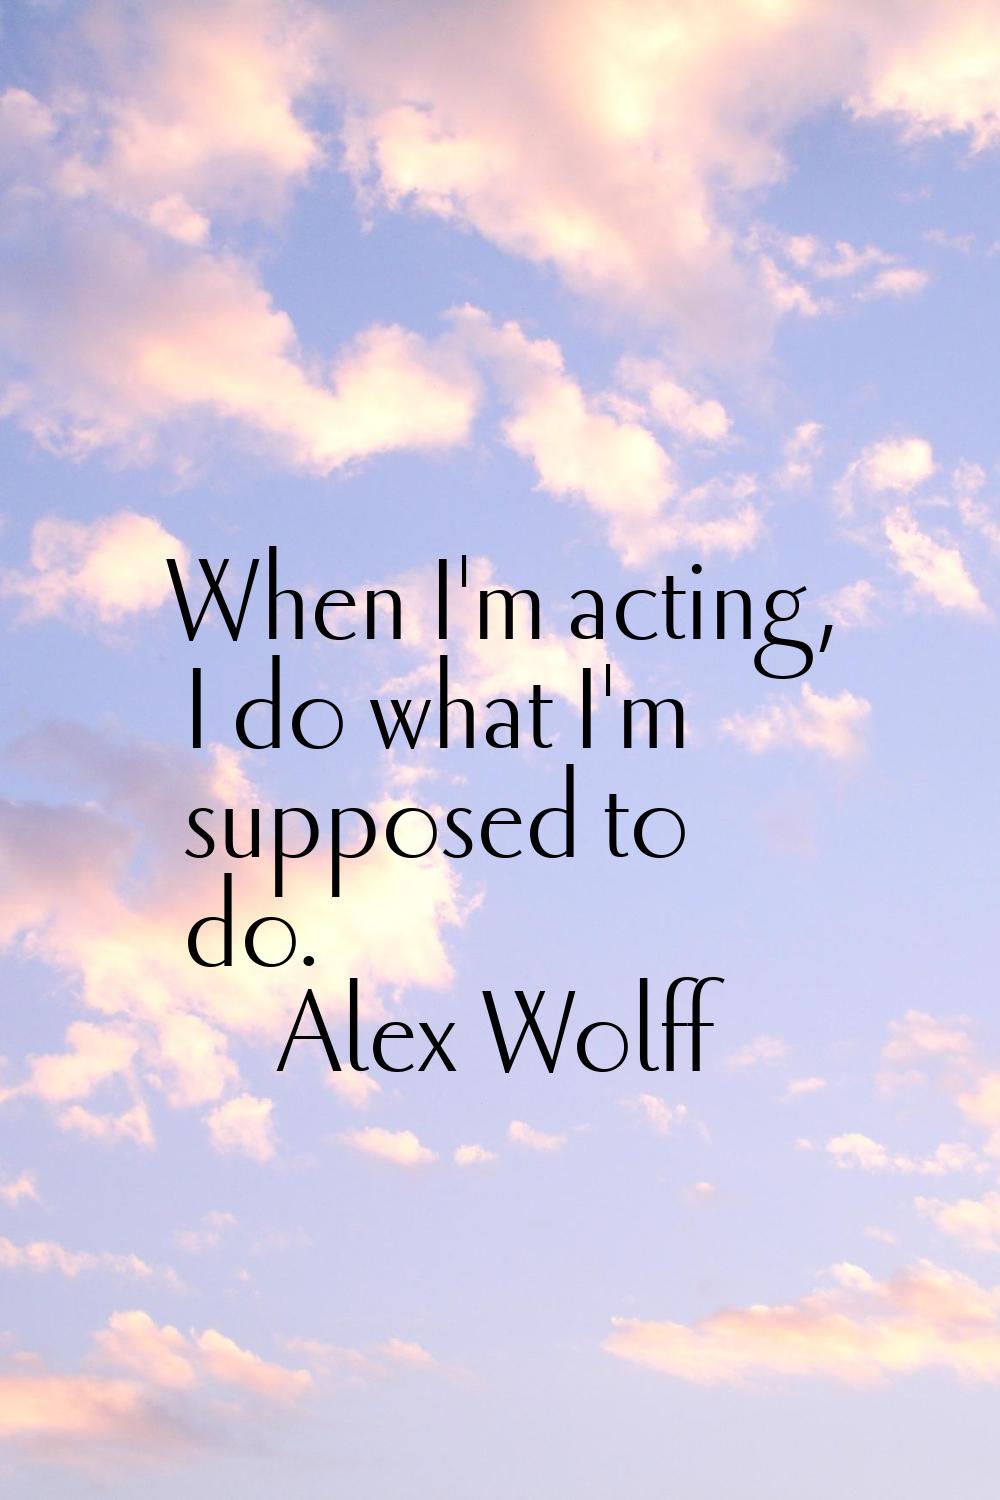 When I'm acting, I do what I'm supposed to do.